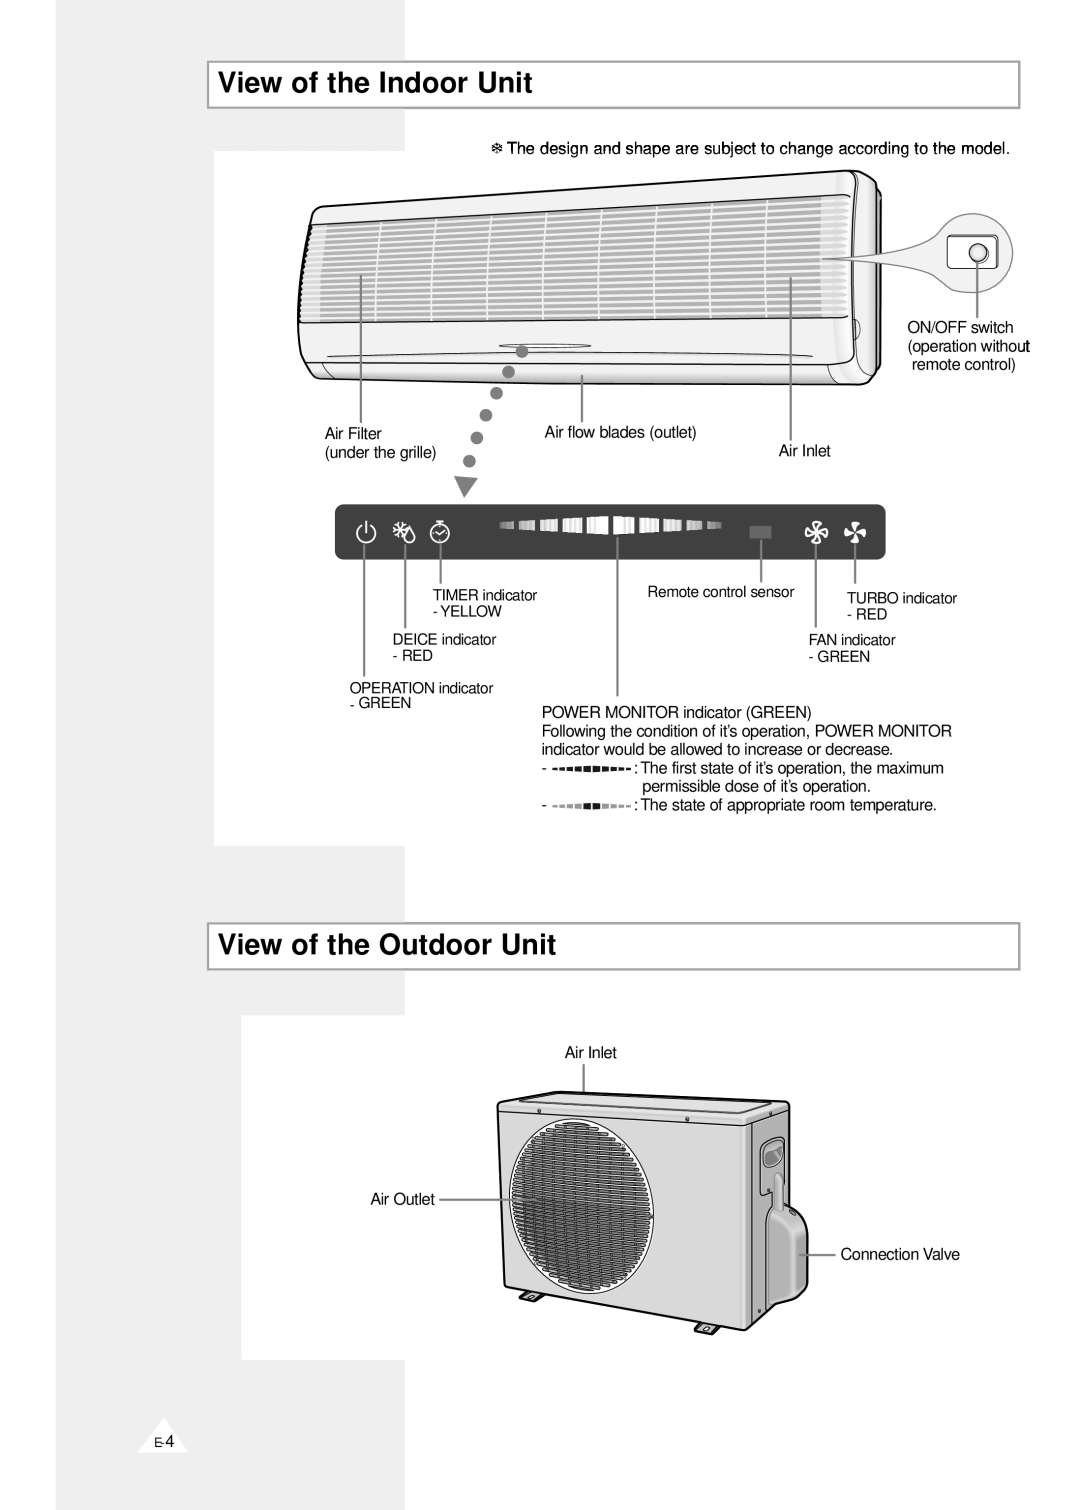 Samsung AQV09F2VE/D, AQV12F2VE/D manual View of the Indoor Unit, View of the Outdoor Unit 